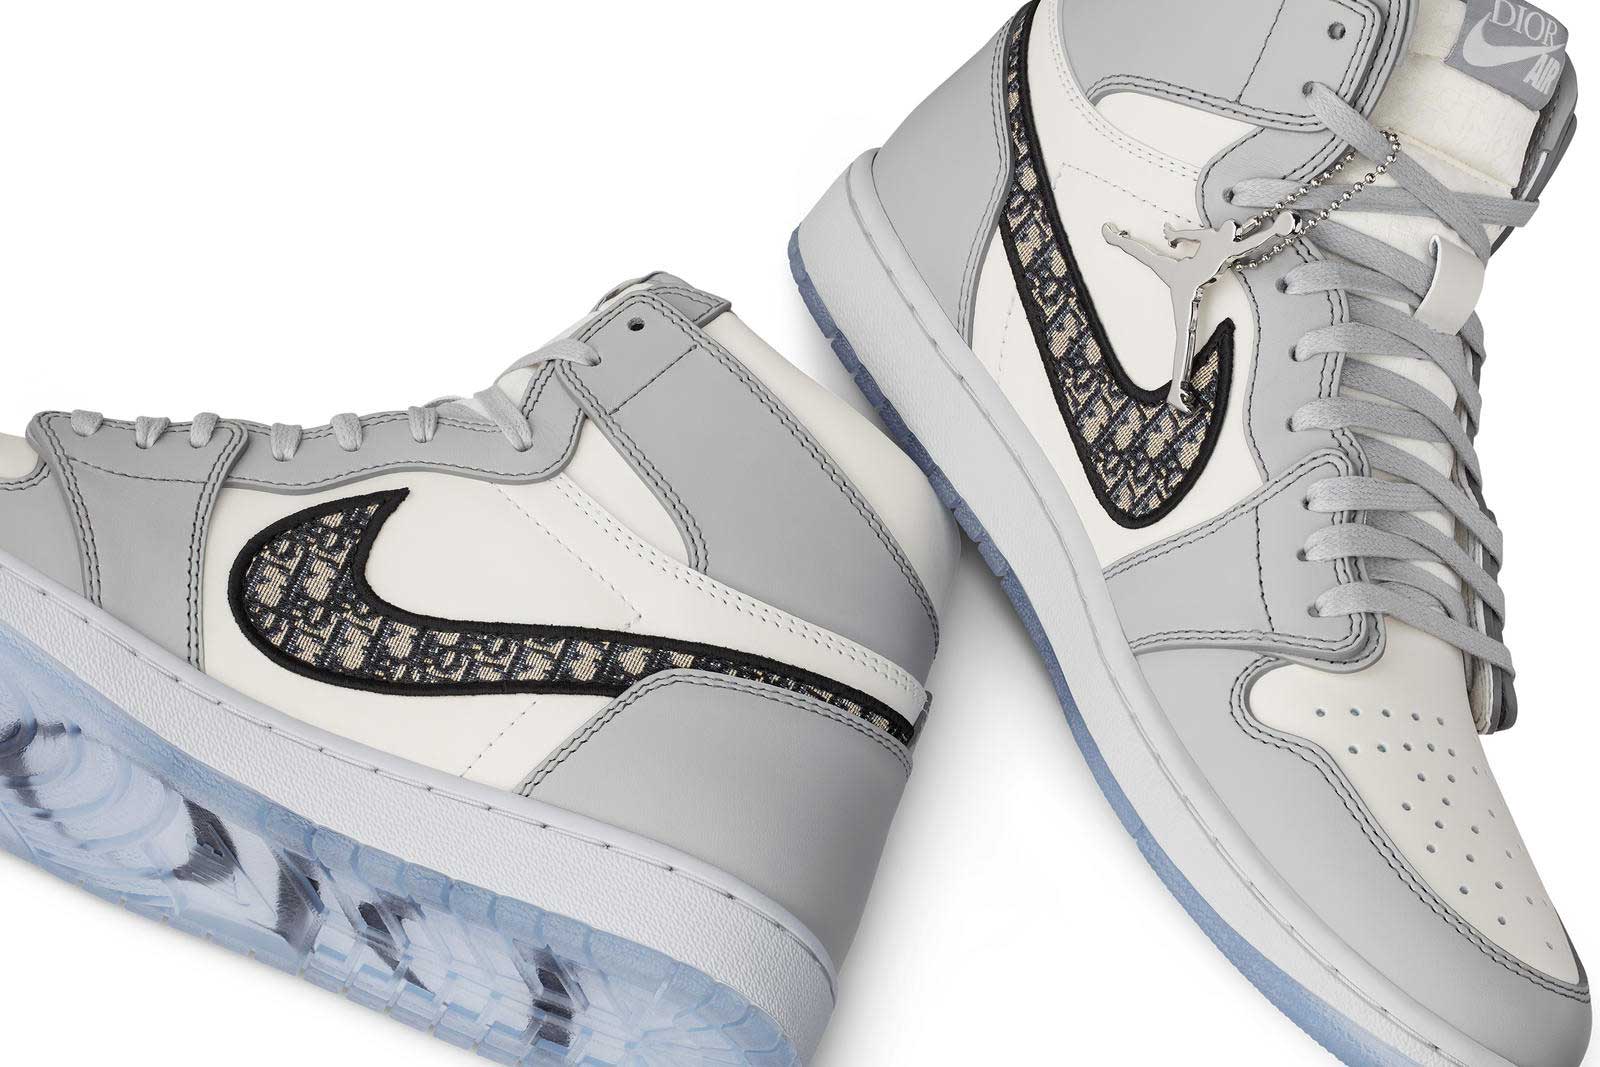 how much do the dior jordans cost